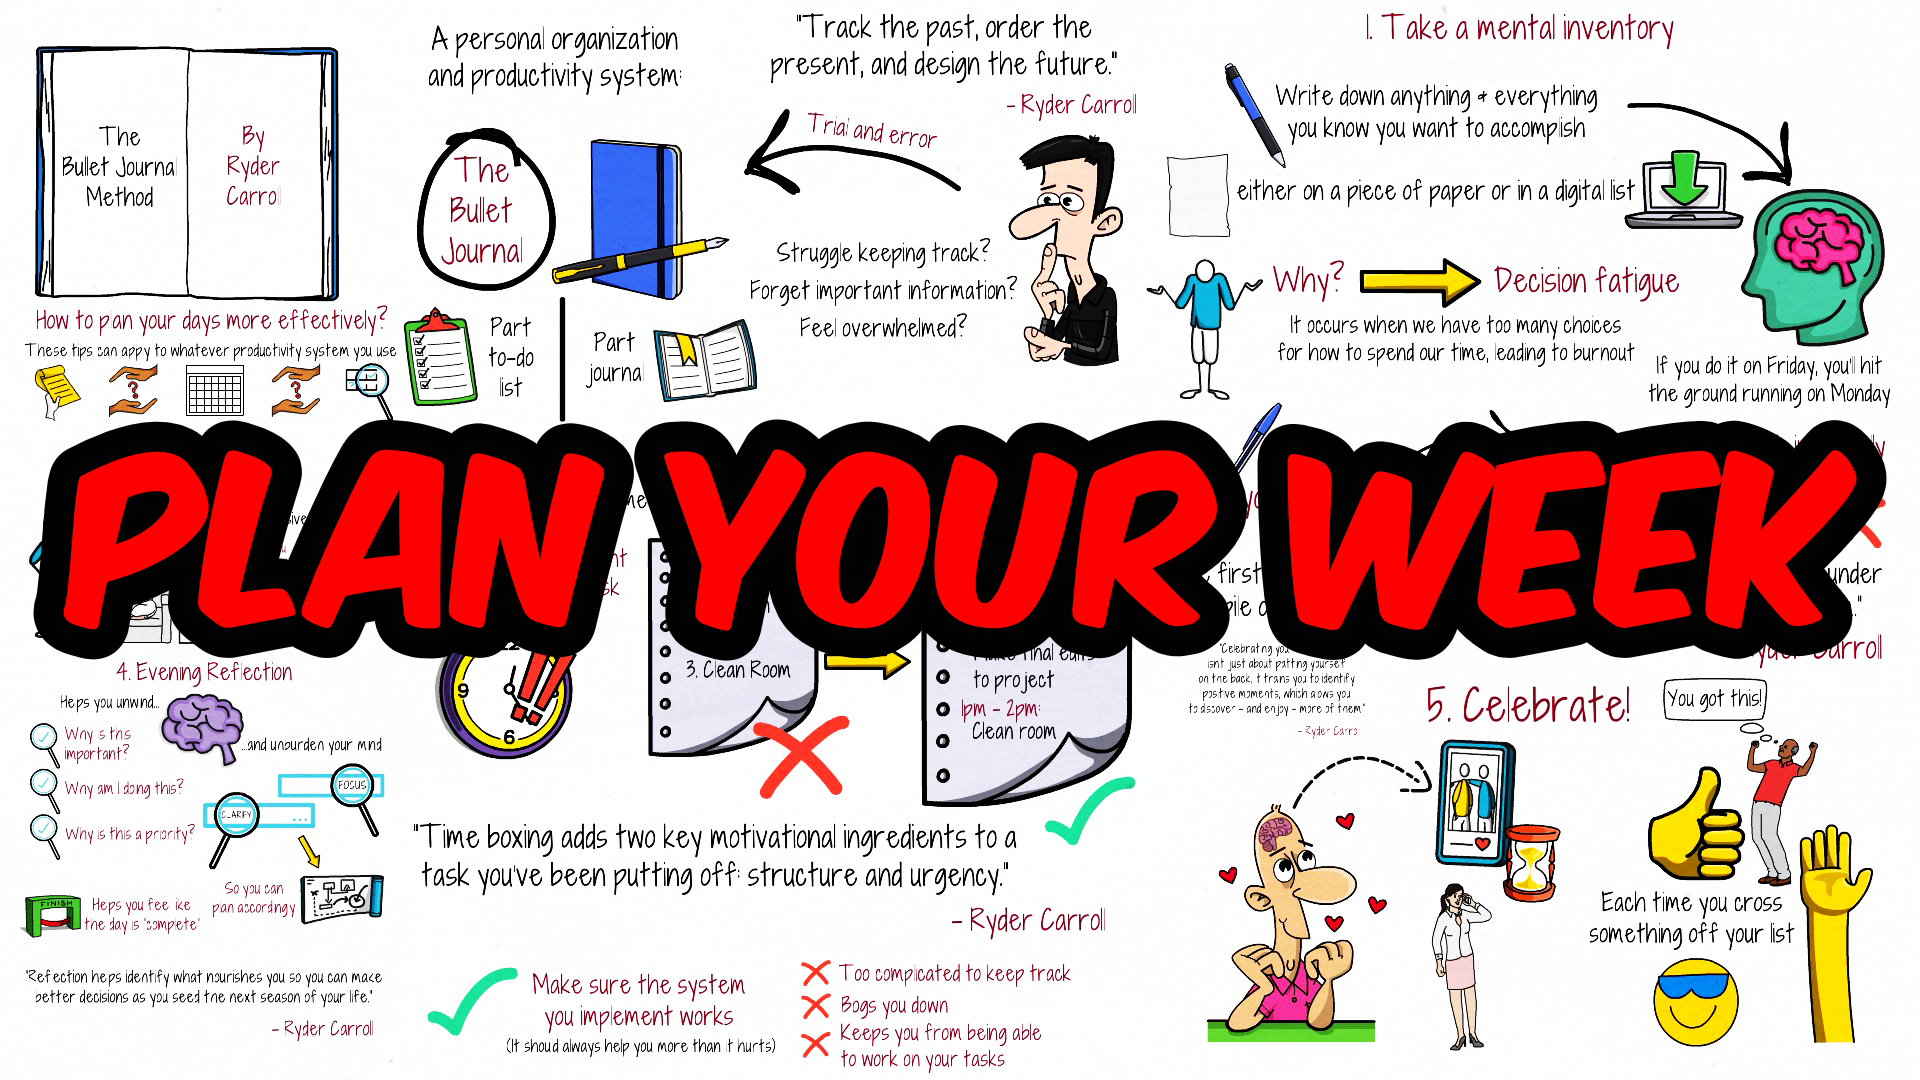 How to Plan Your Week Effectively